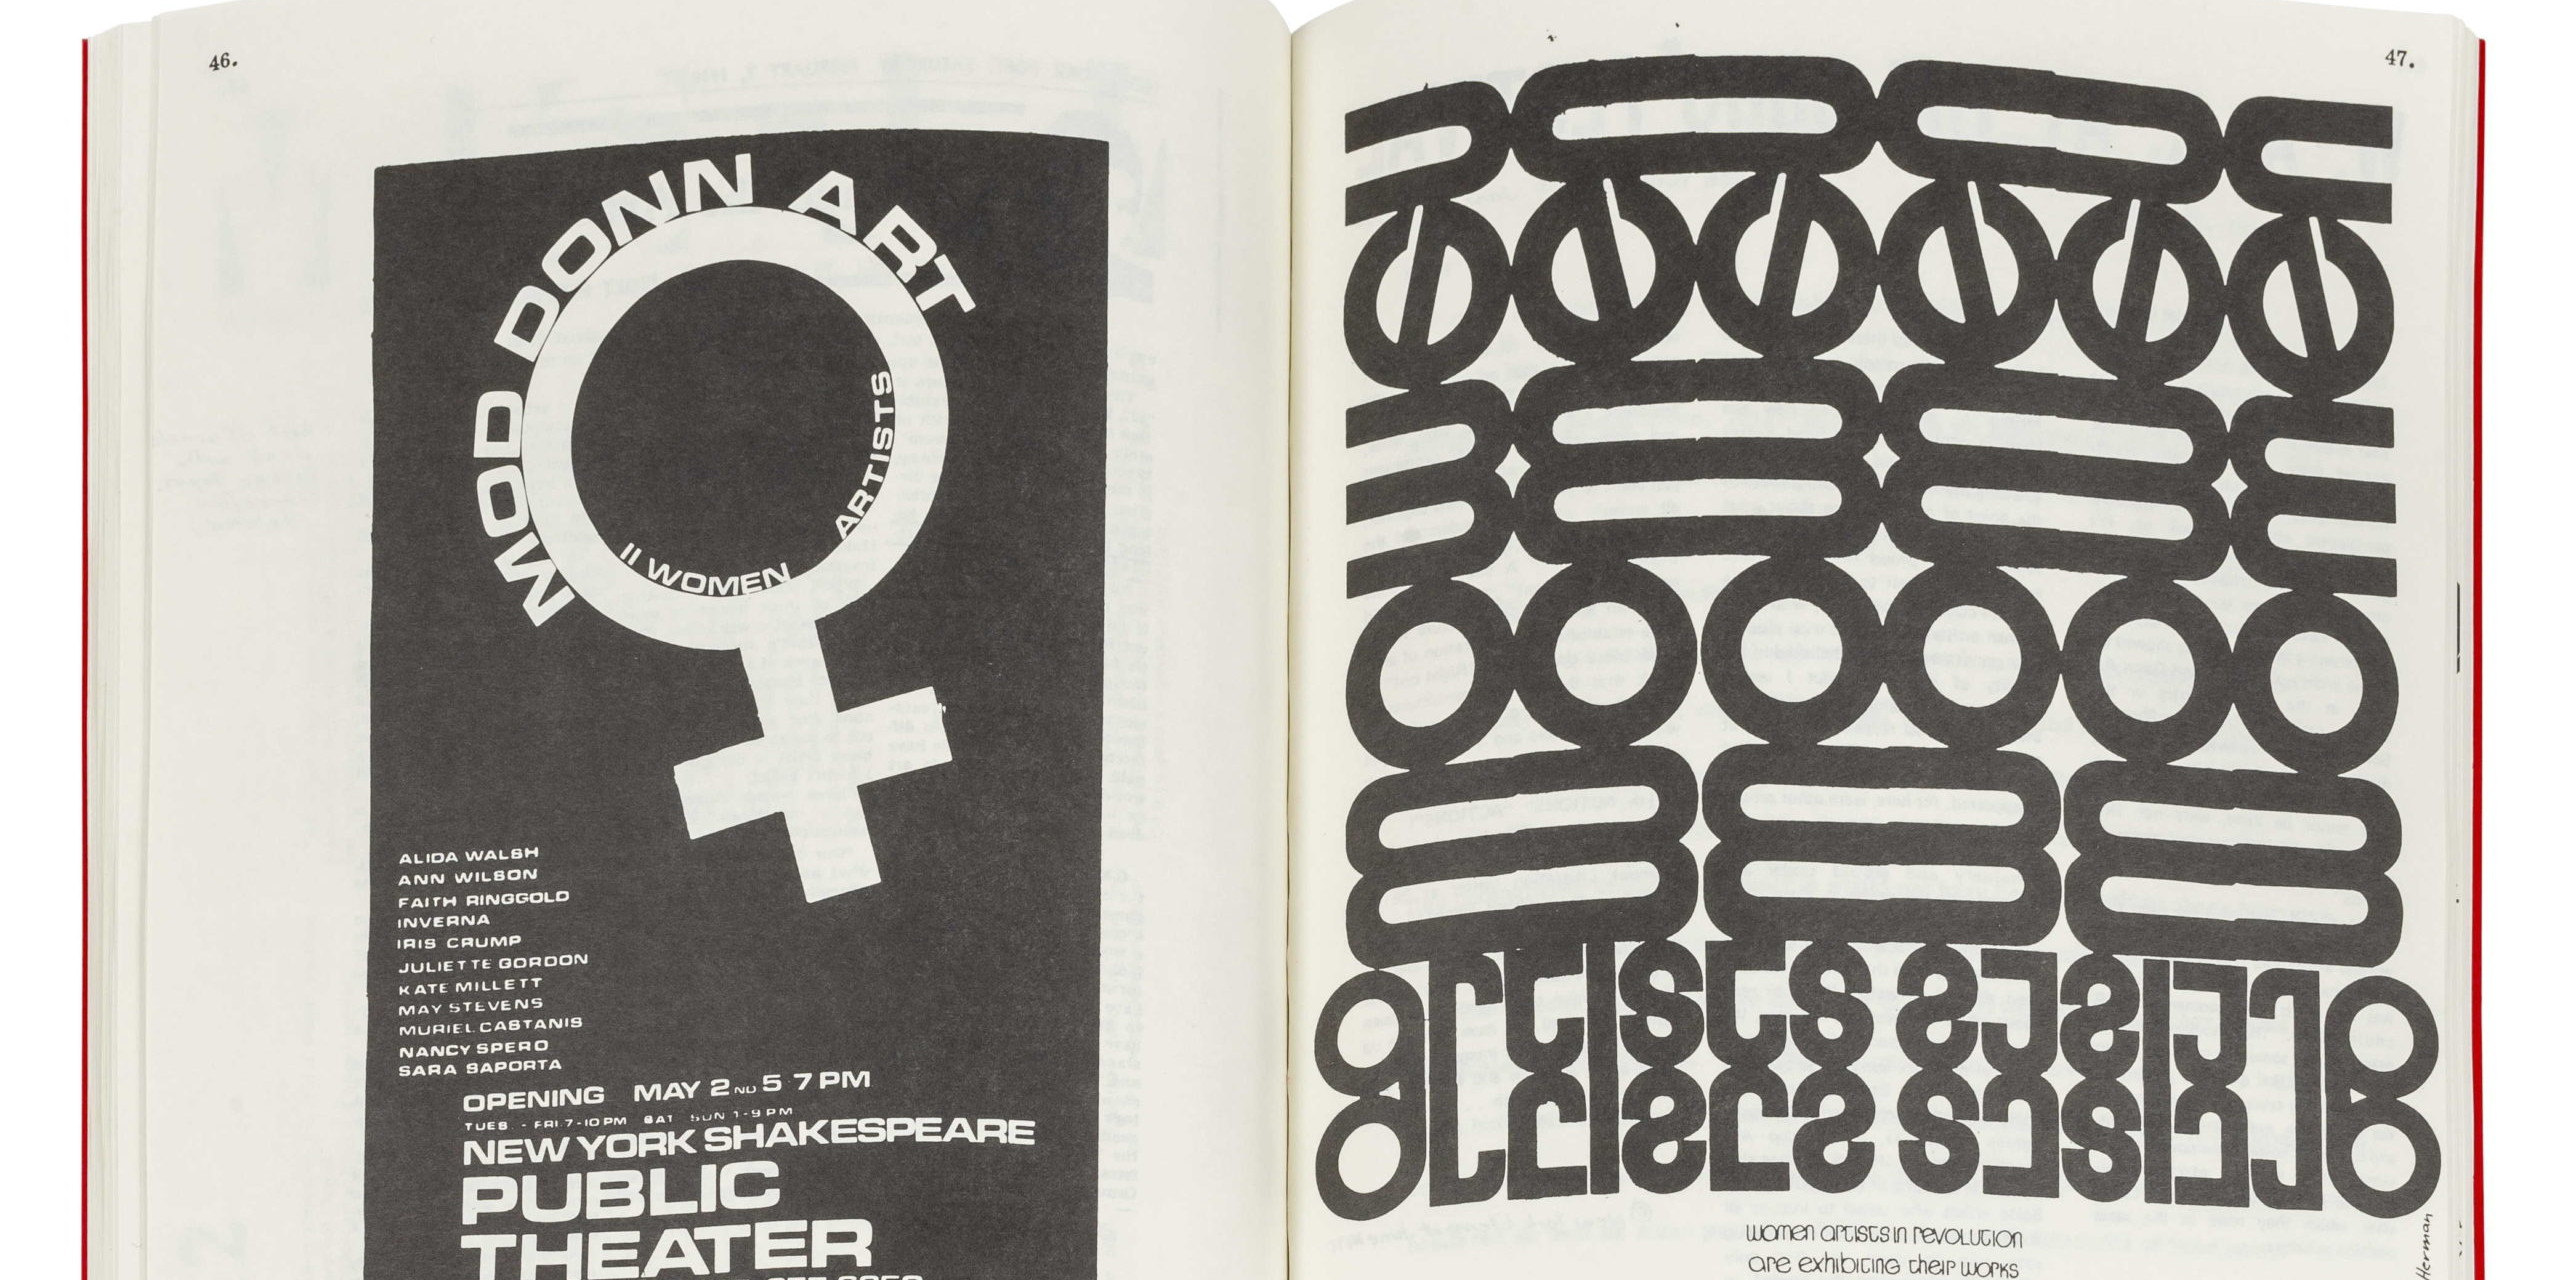 Spread from A Documentary HerStory of Women Artists in Revolution.